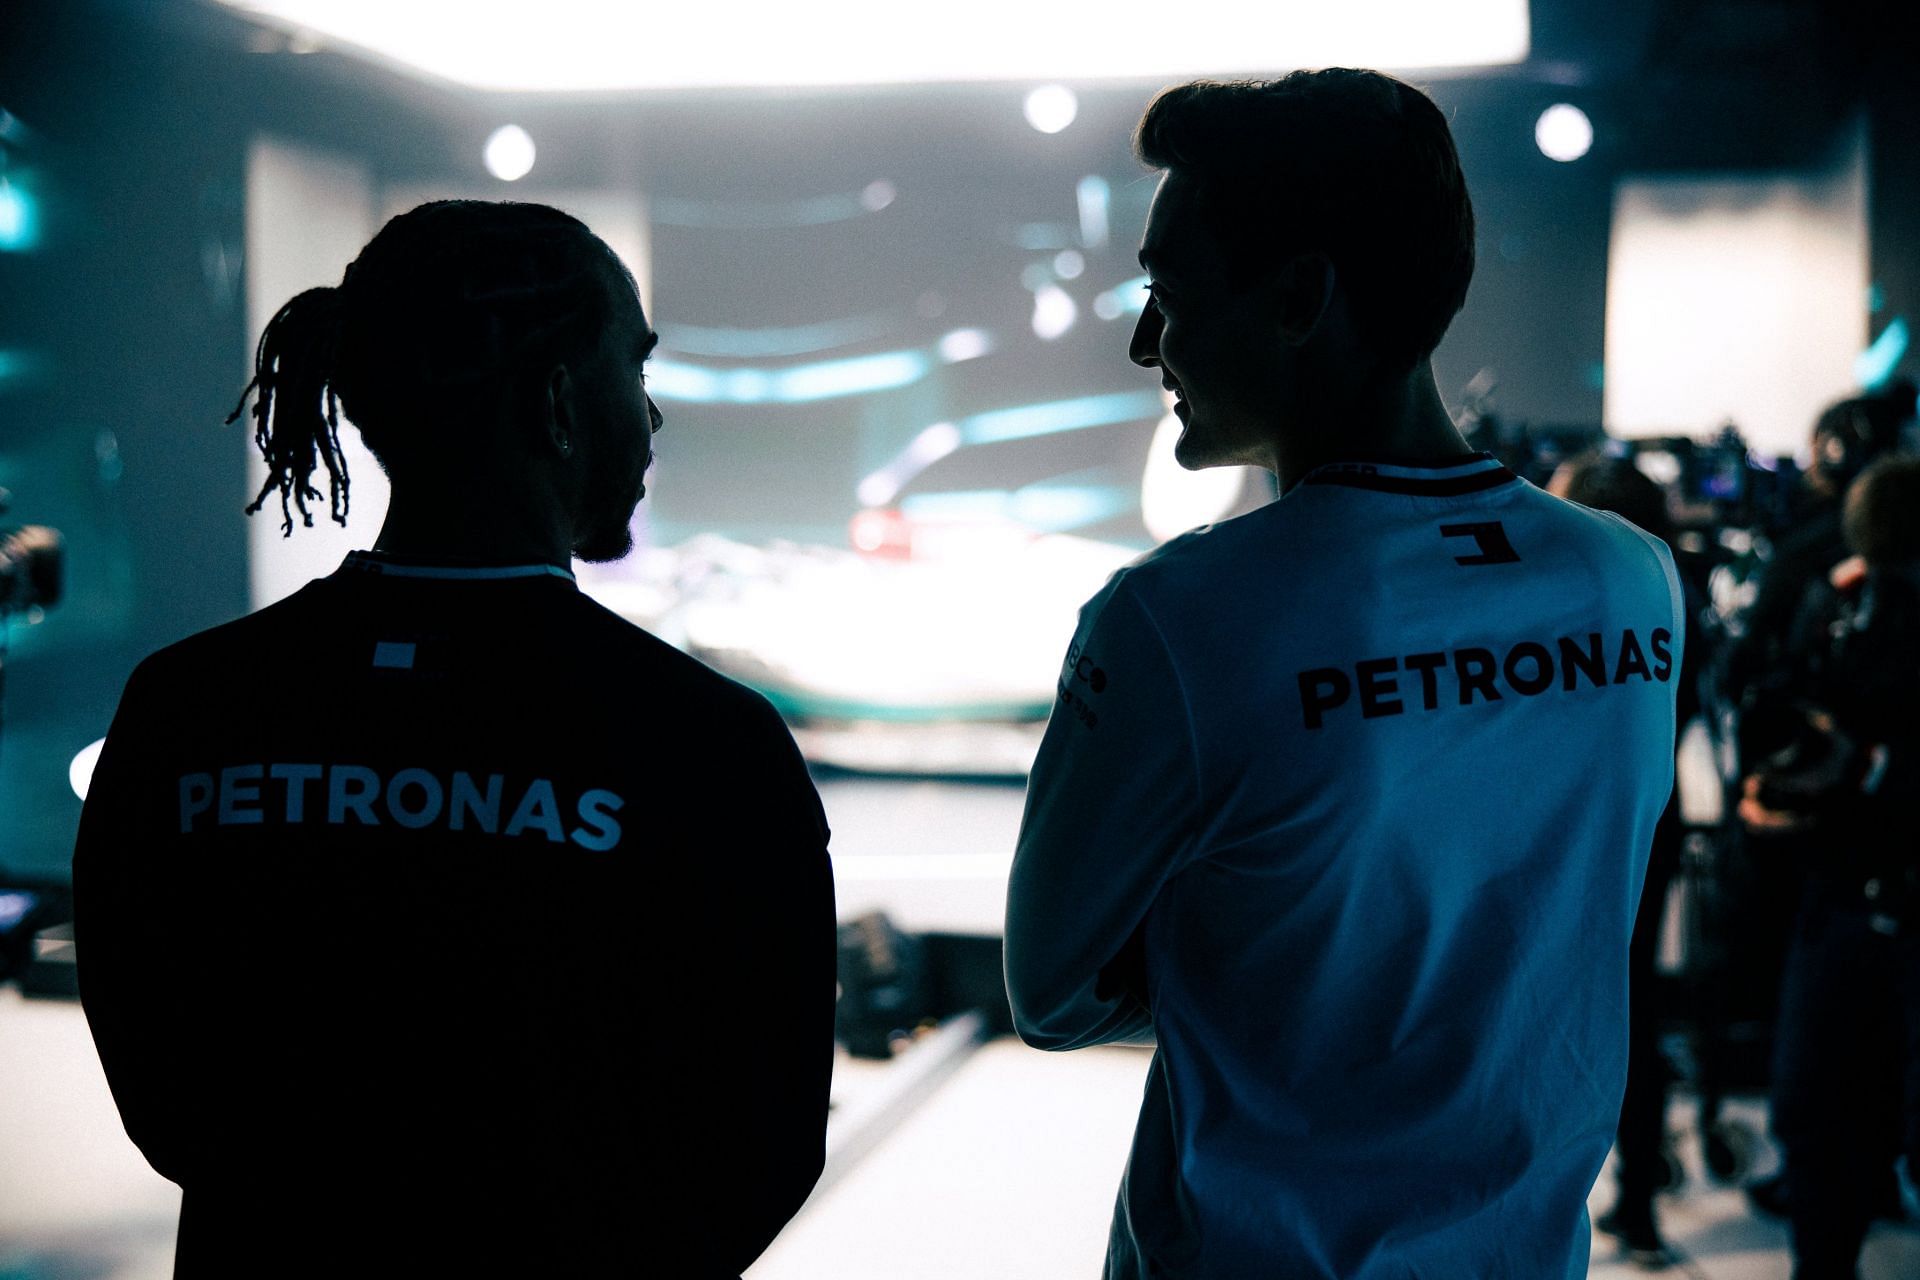 Lewis Hamilton (left) and George Russell (right) ahead of the Mercedes 2022 launch